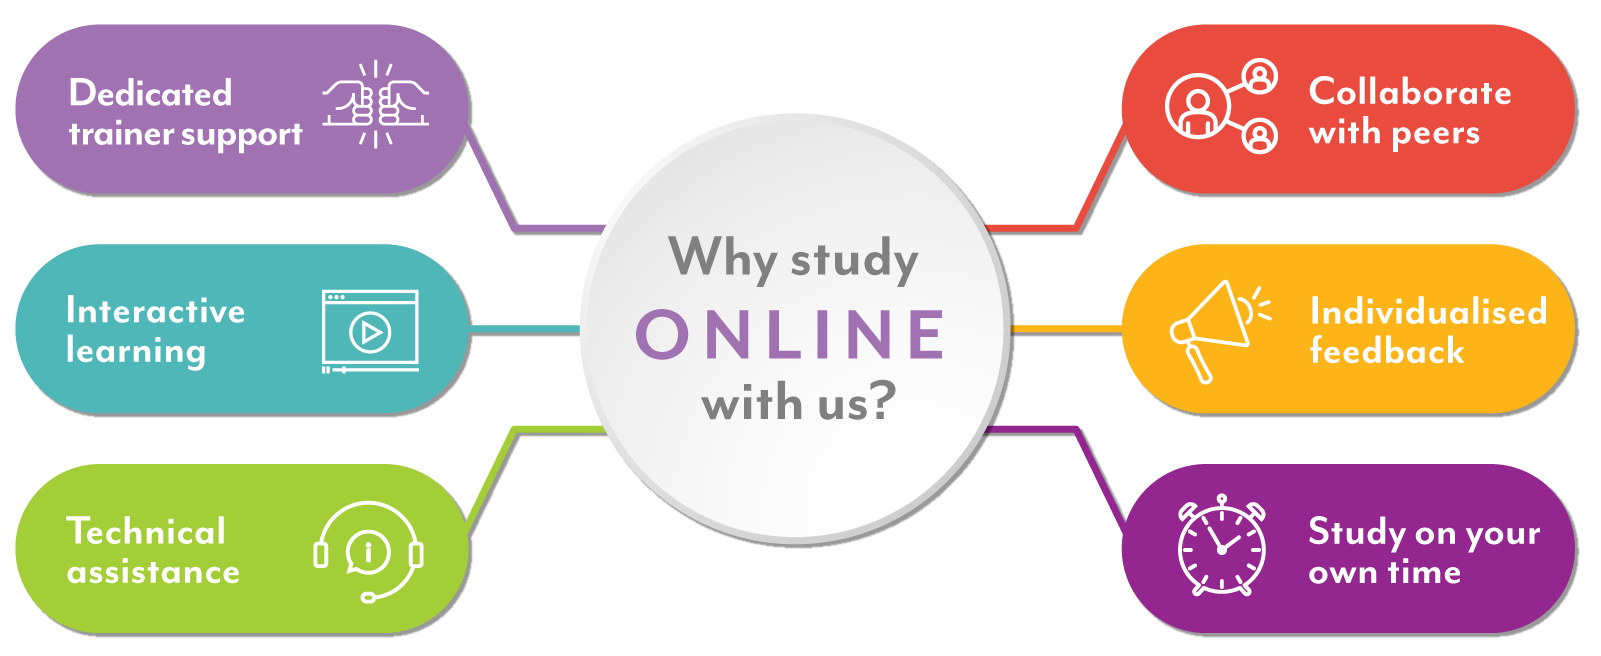 Why study online?